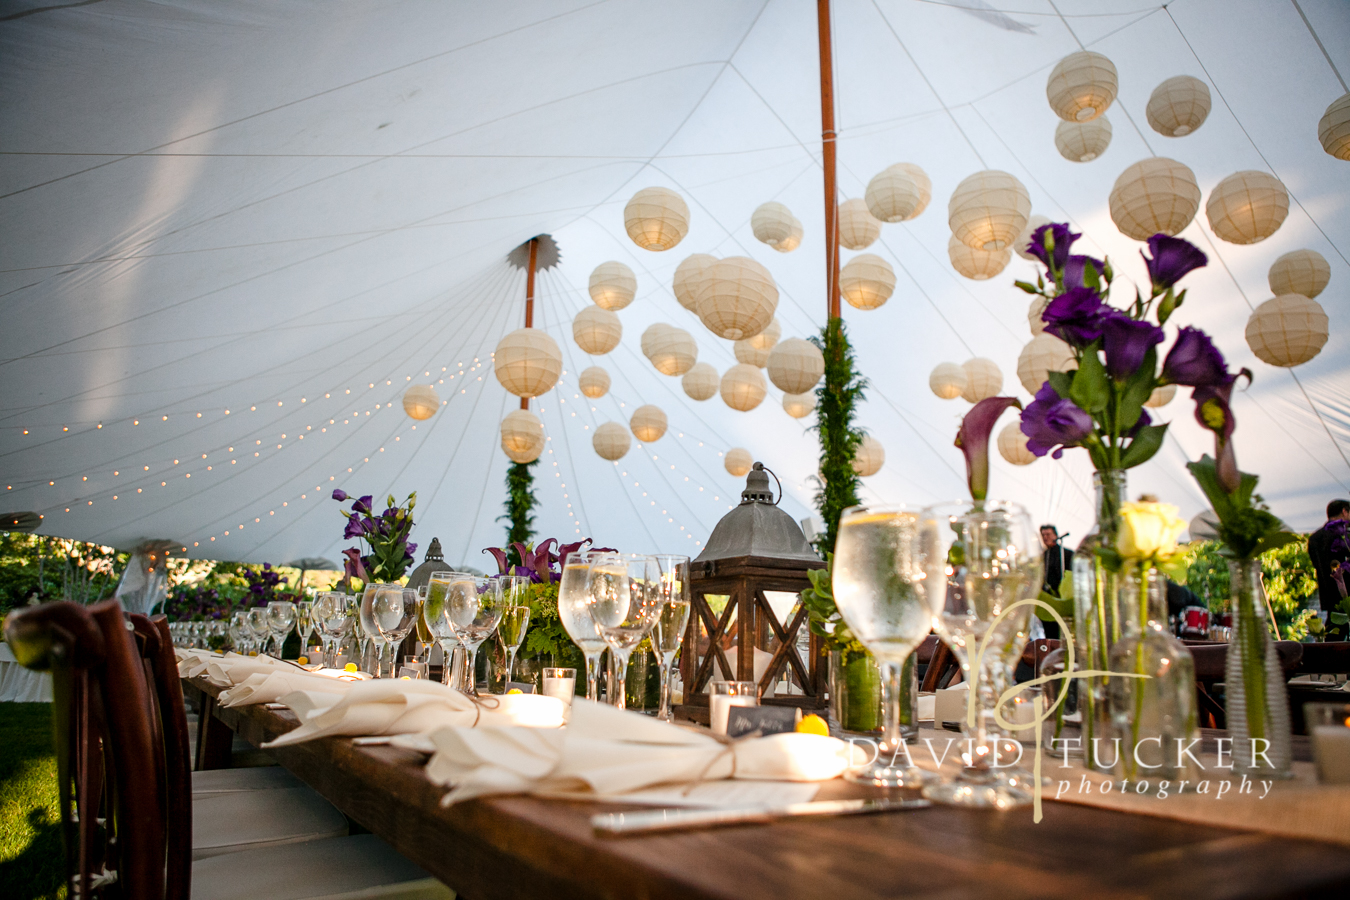 Farm Tables in a Tidewater Sailcloth Tent